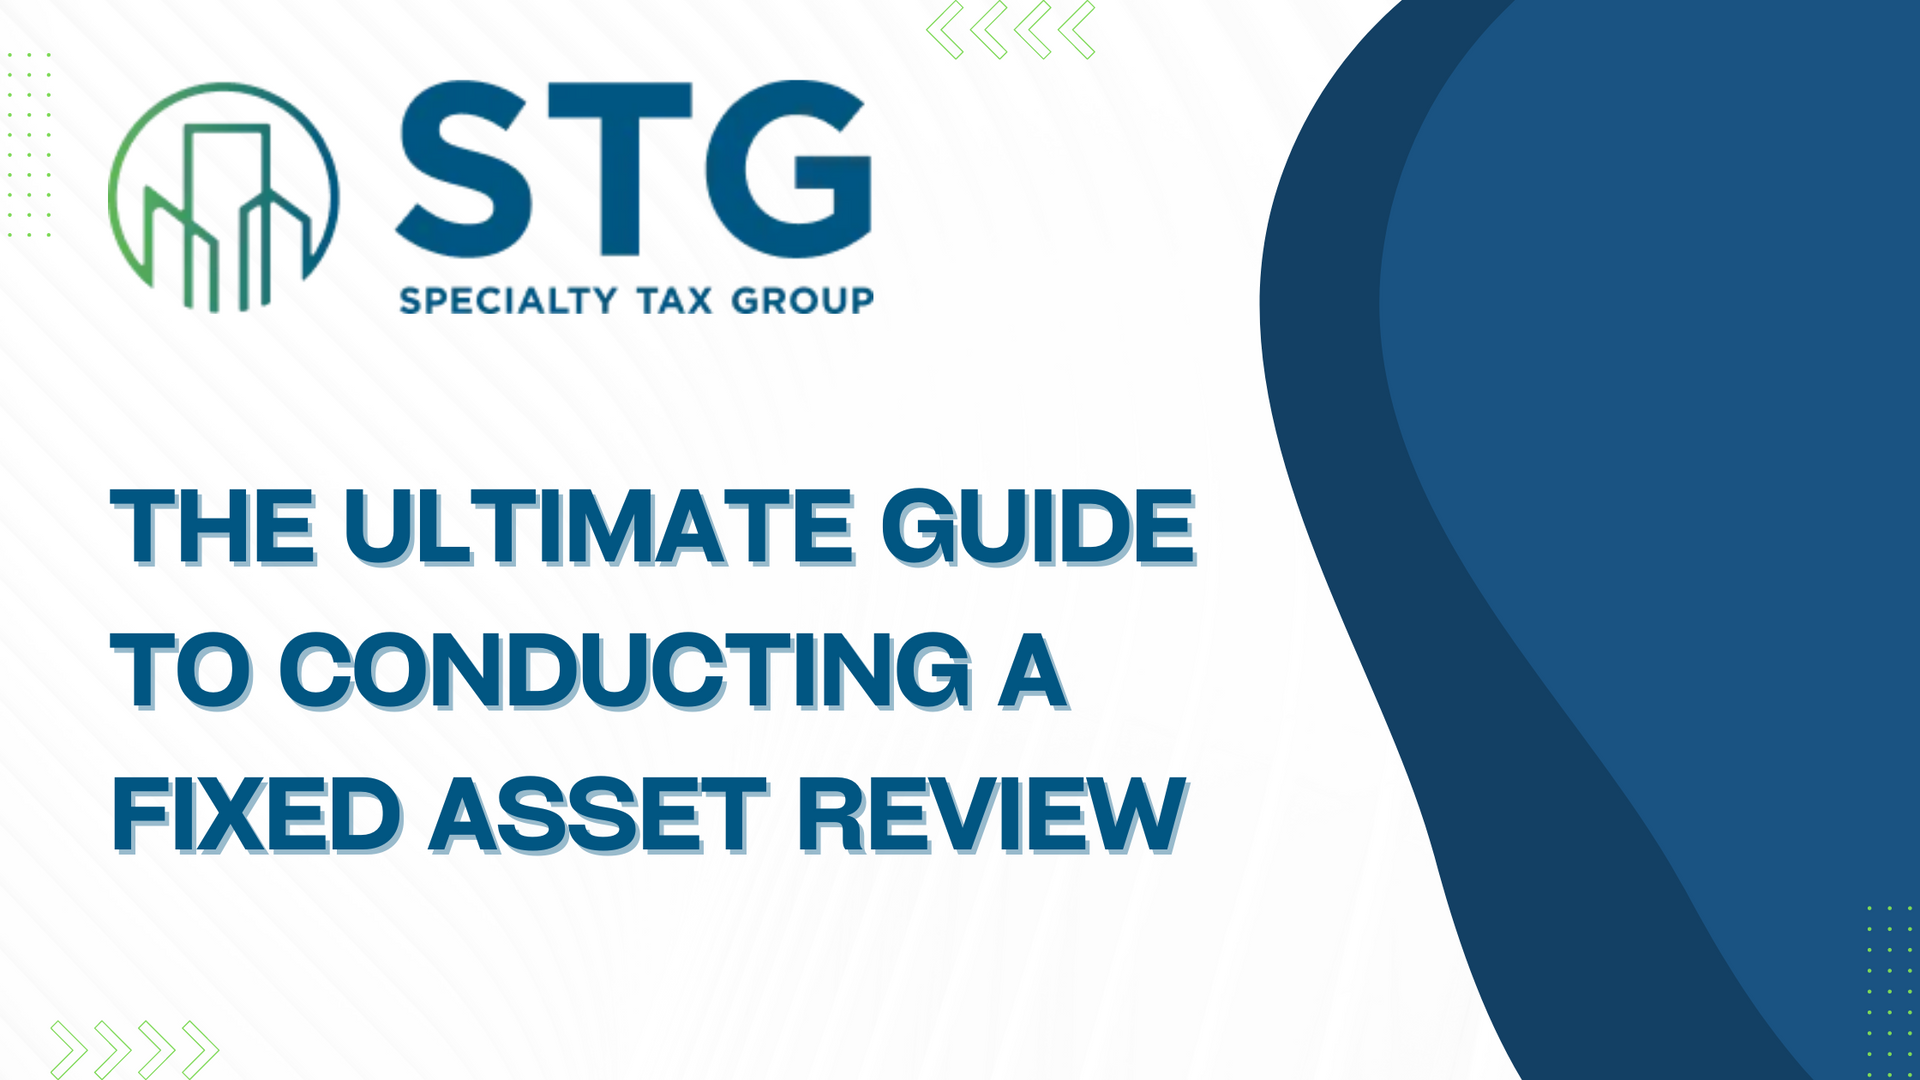 The Ultimate Guide to Conducting a Fixed Asset Review